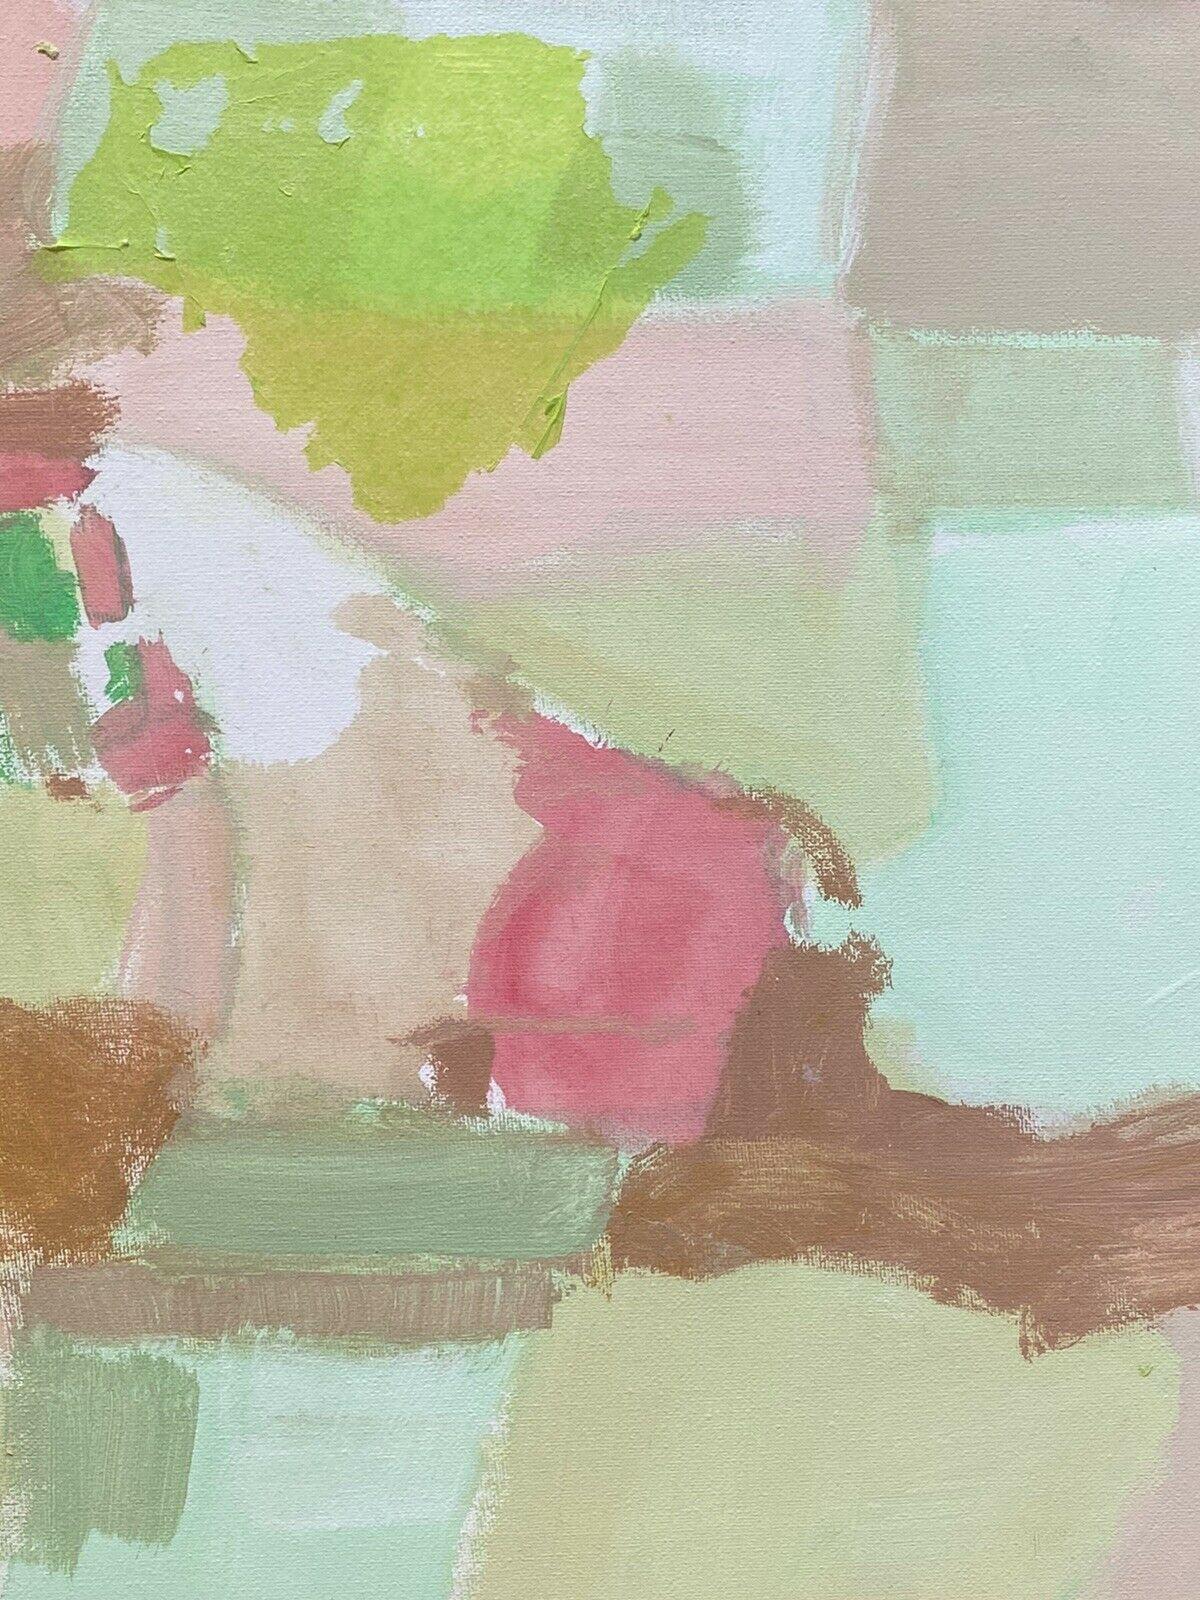 PASTEL PINKS & GREEN COLORS - FRENCH CONTEMPORARY ABSTRACT CUBIST PAINTING - Painting by R.Leroy